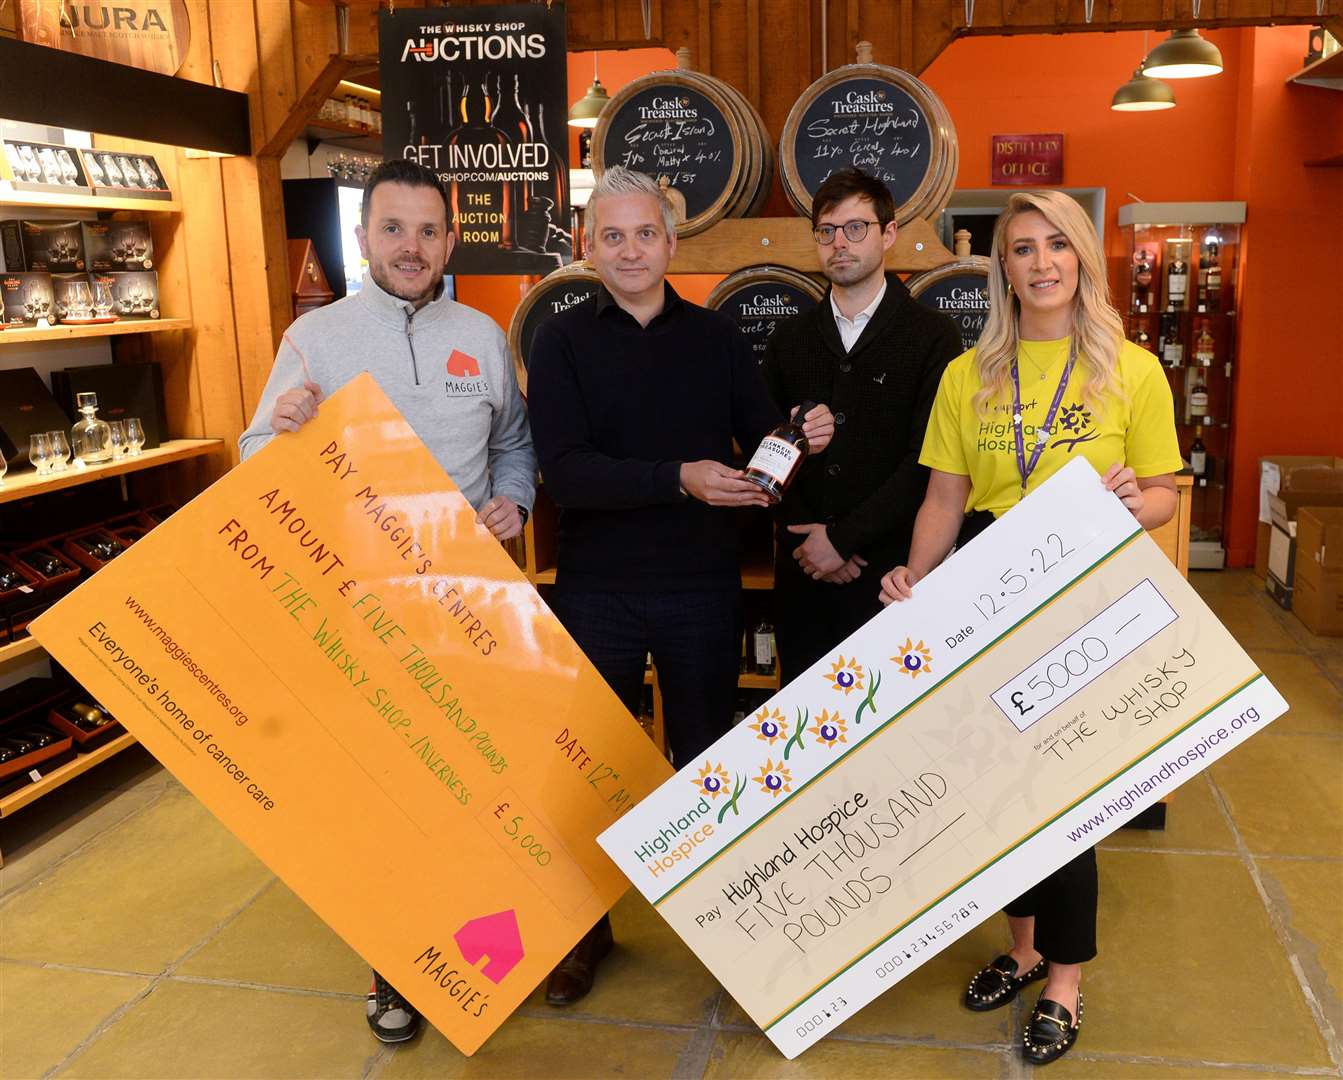 Andrew Benjamin of Maggie's Highland and Karen Duff of Highland Hospice receive £5000 each from Darren Leitch and Brett Gleed of the Whisky Shop. Picture: Gary Anthony